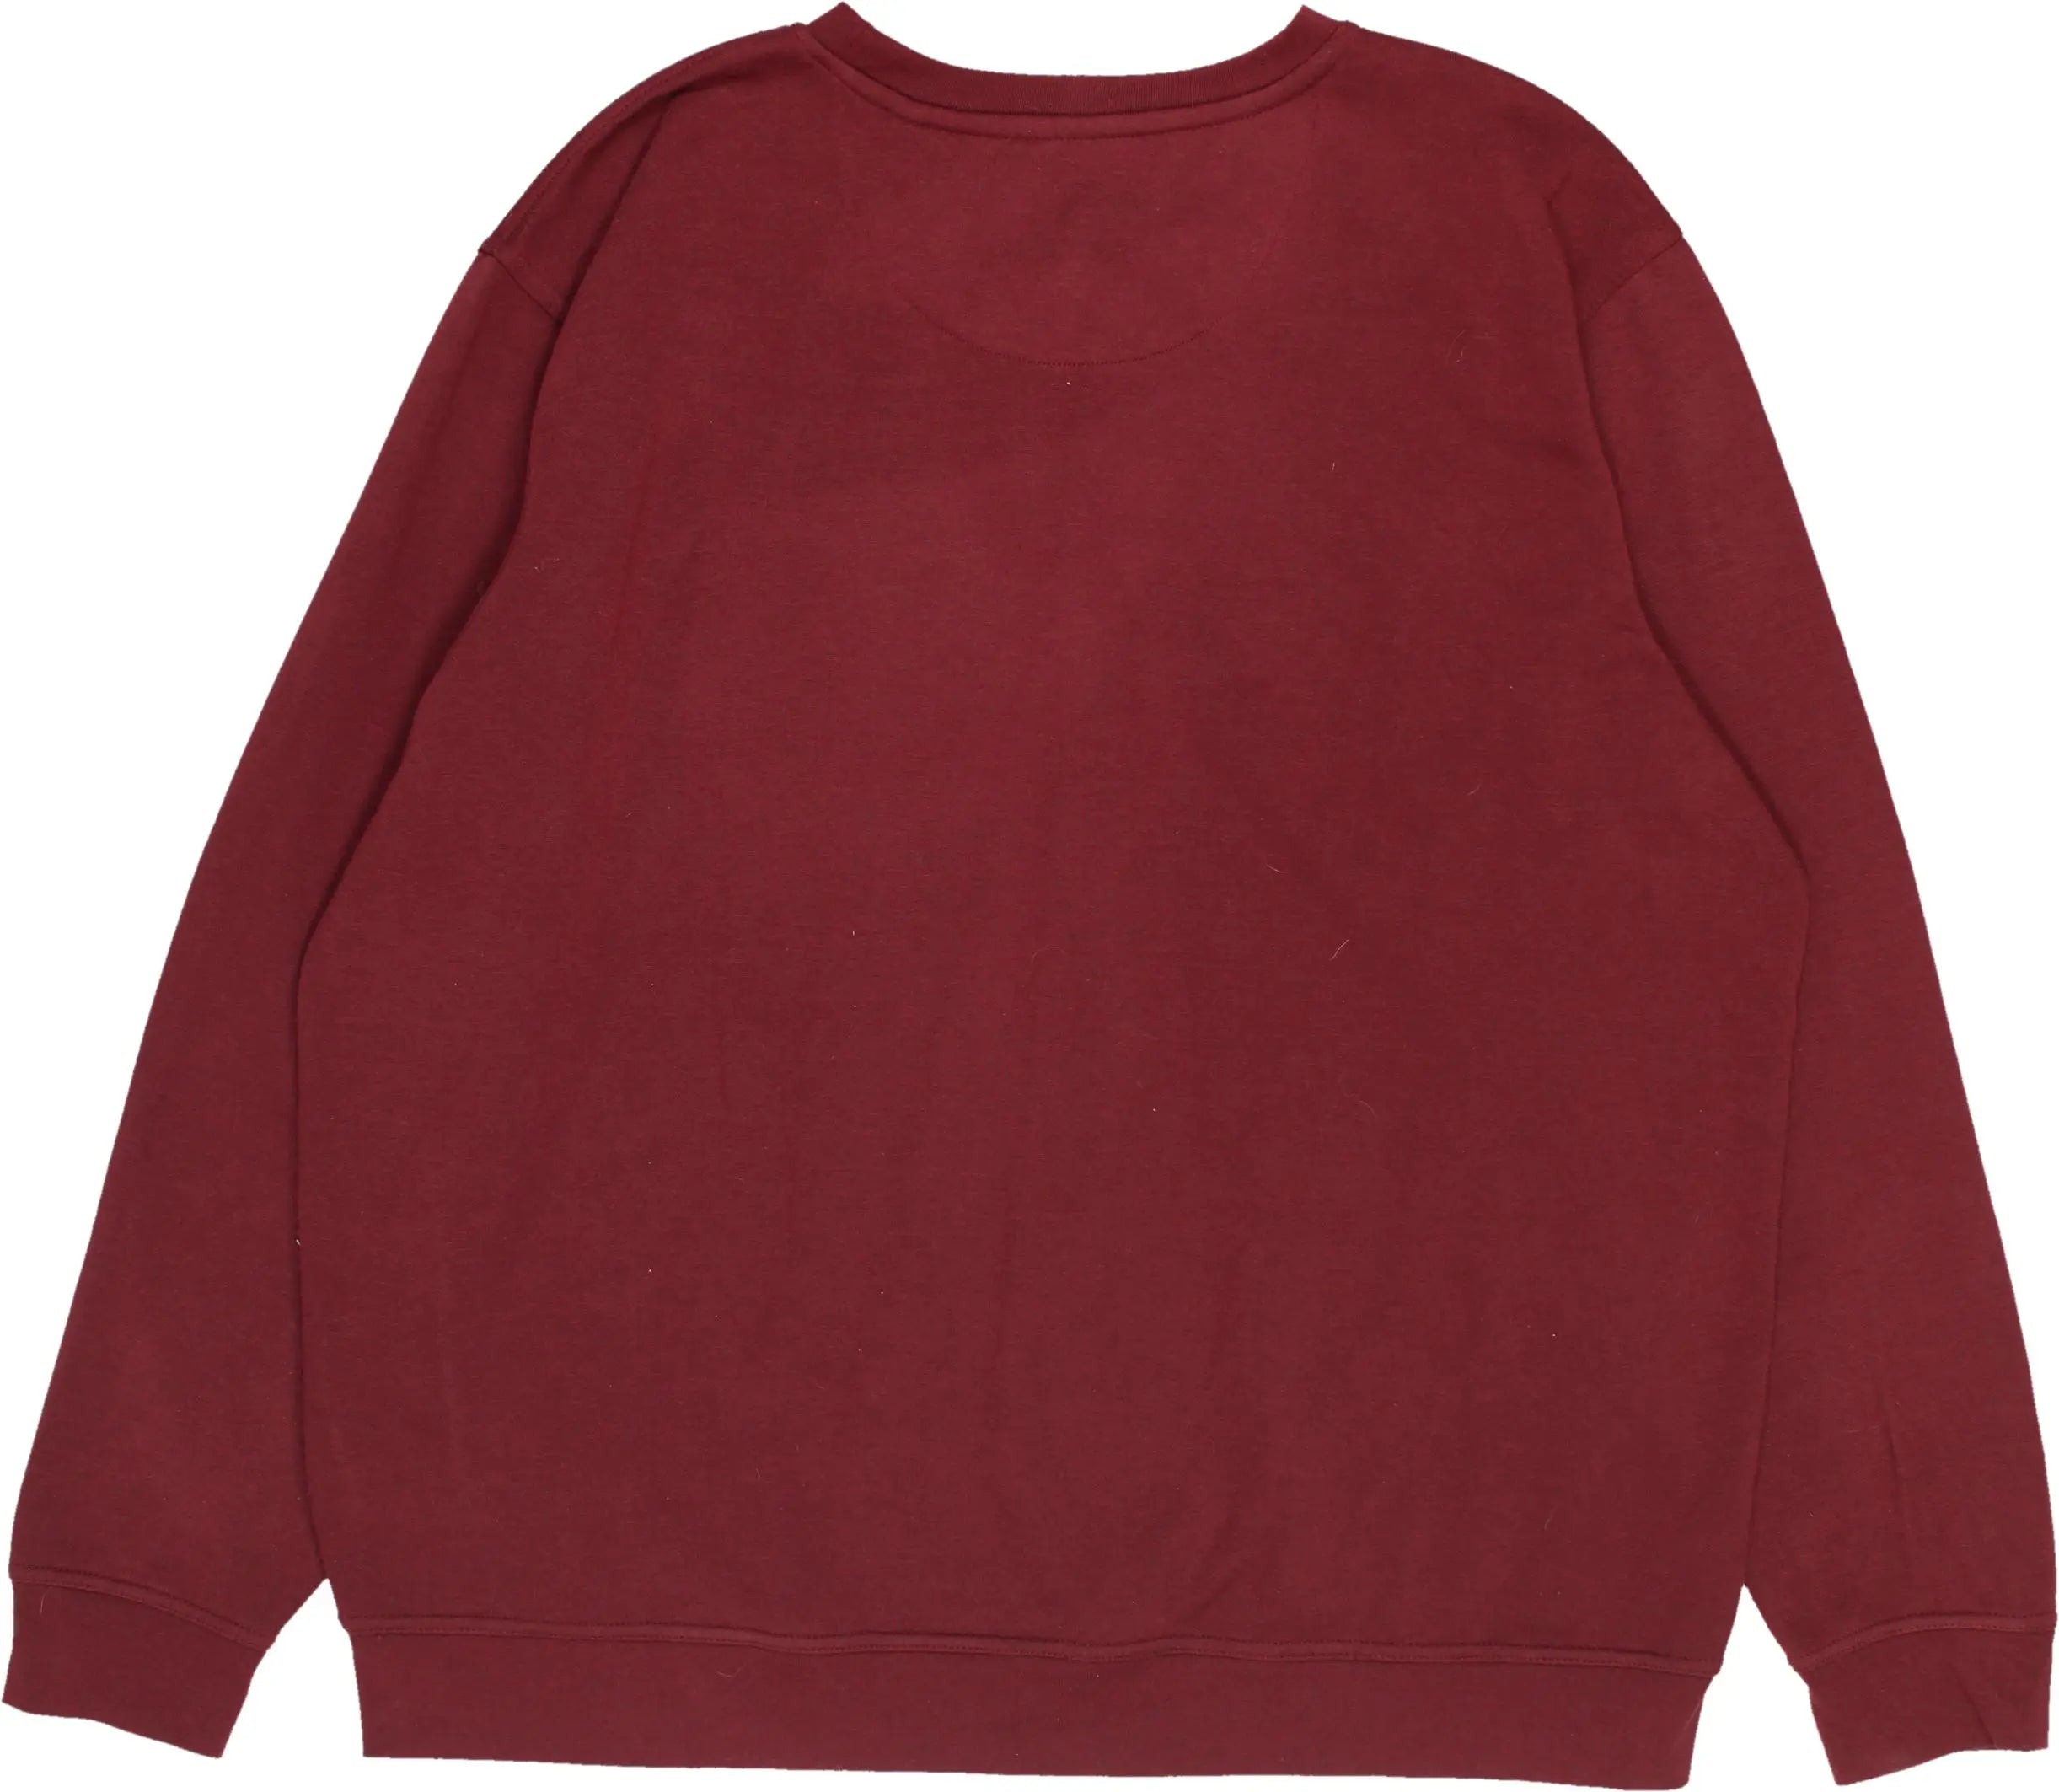 C&A - Red Plain Sweatshirt- ThriftTale.com - Vintage and second handclothing